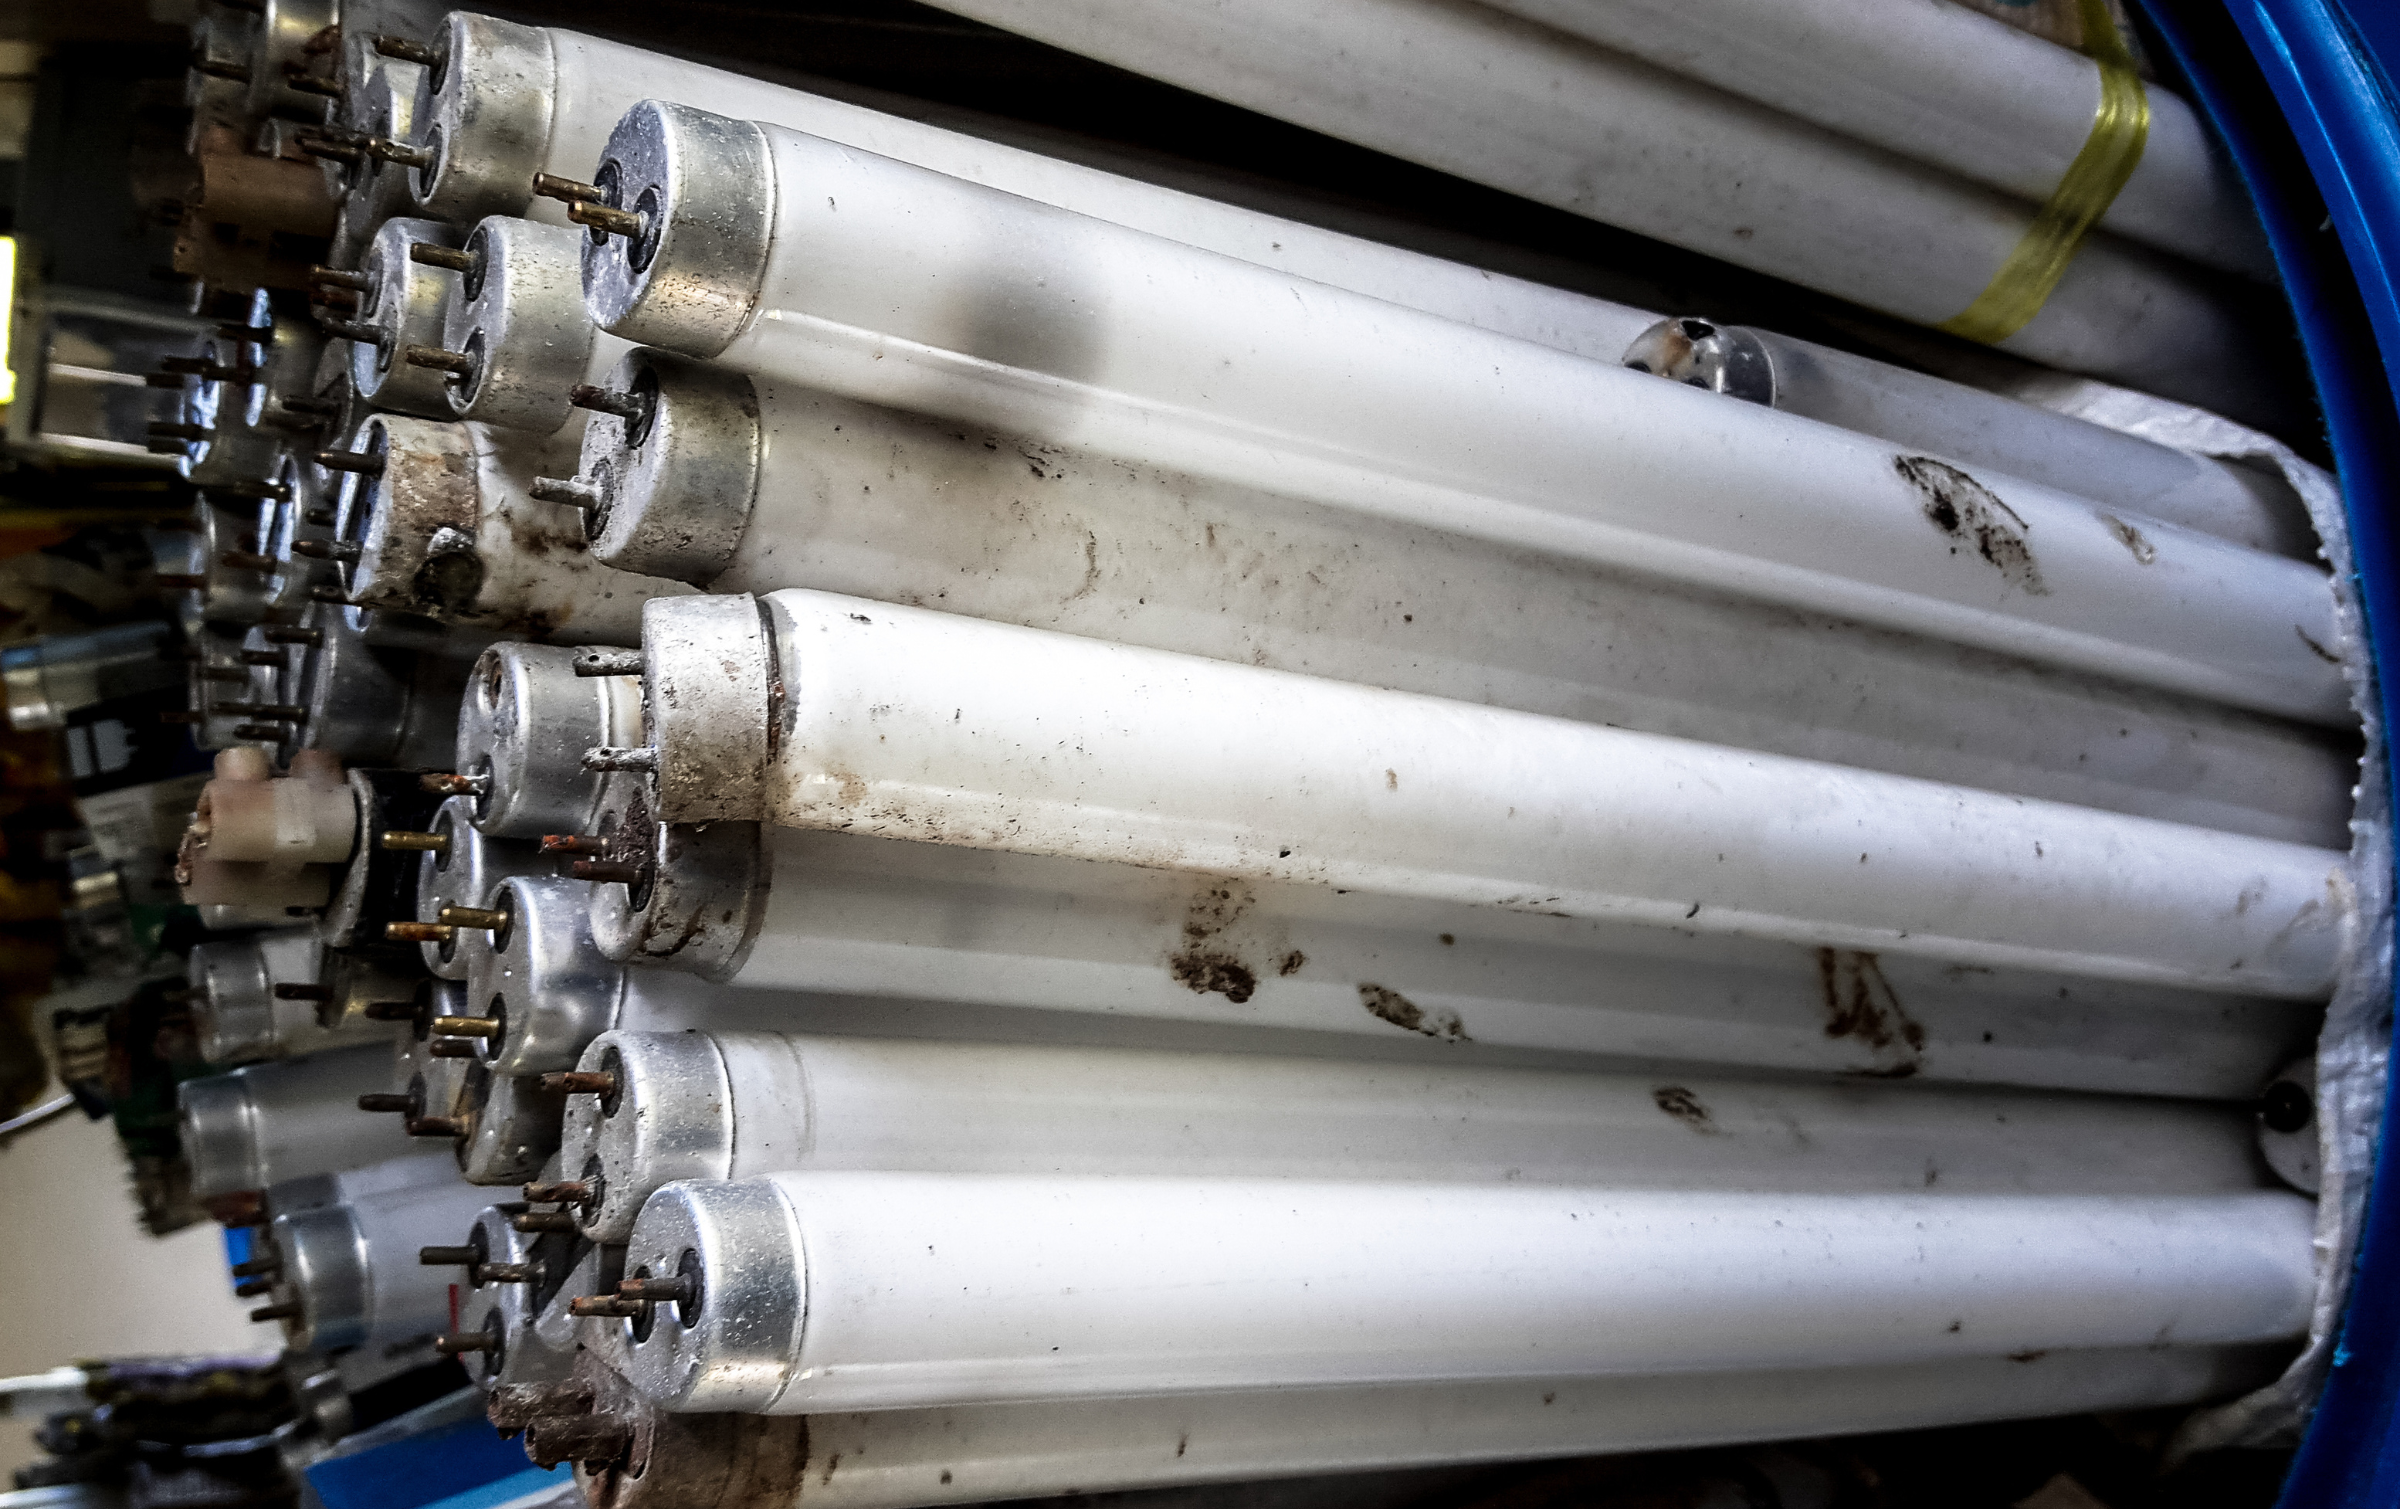 Large quantity of used fluorescent bulbs